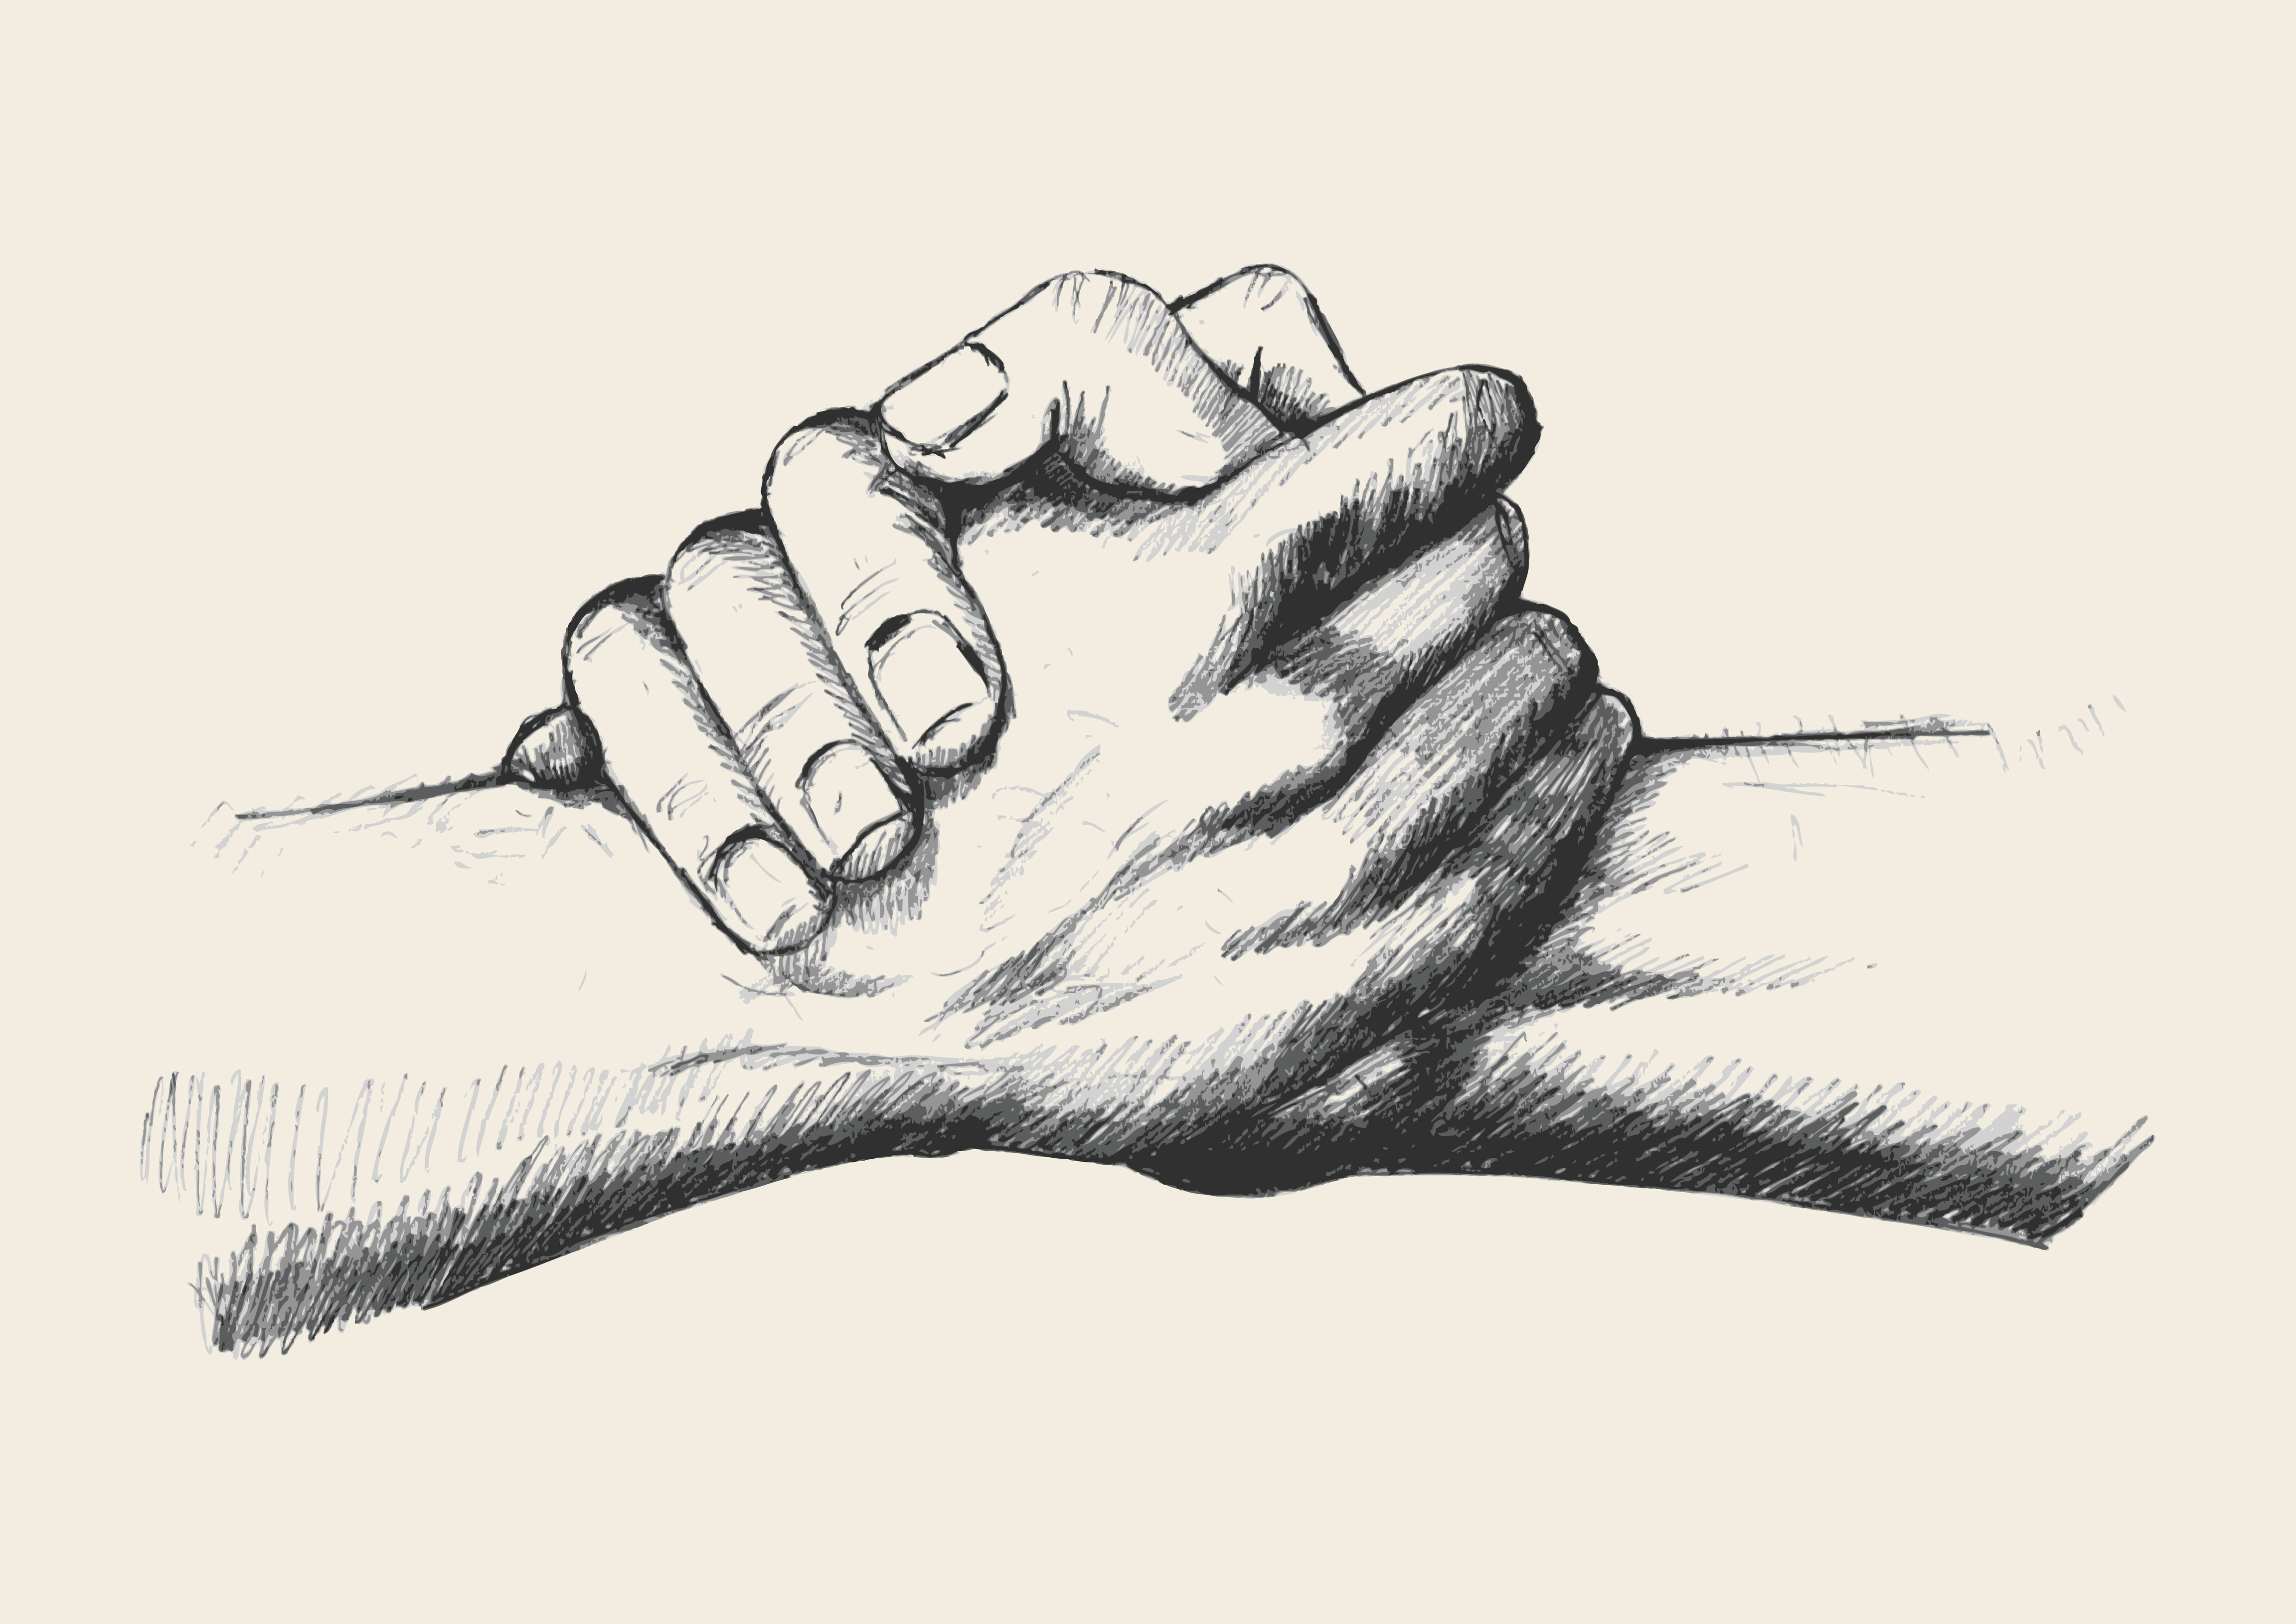 A pencil drawing of two hands clasping each other